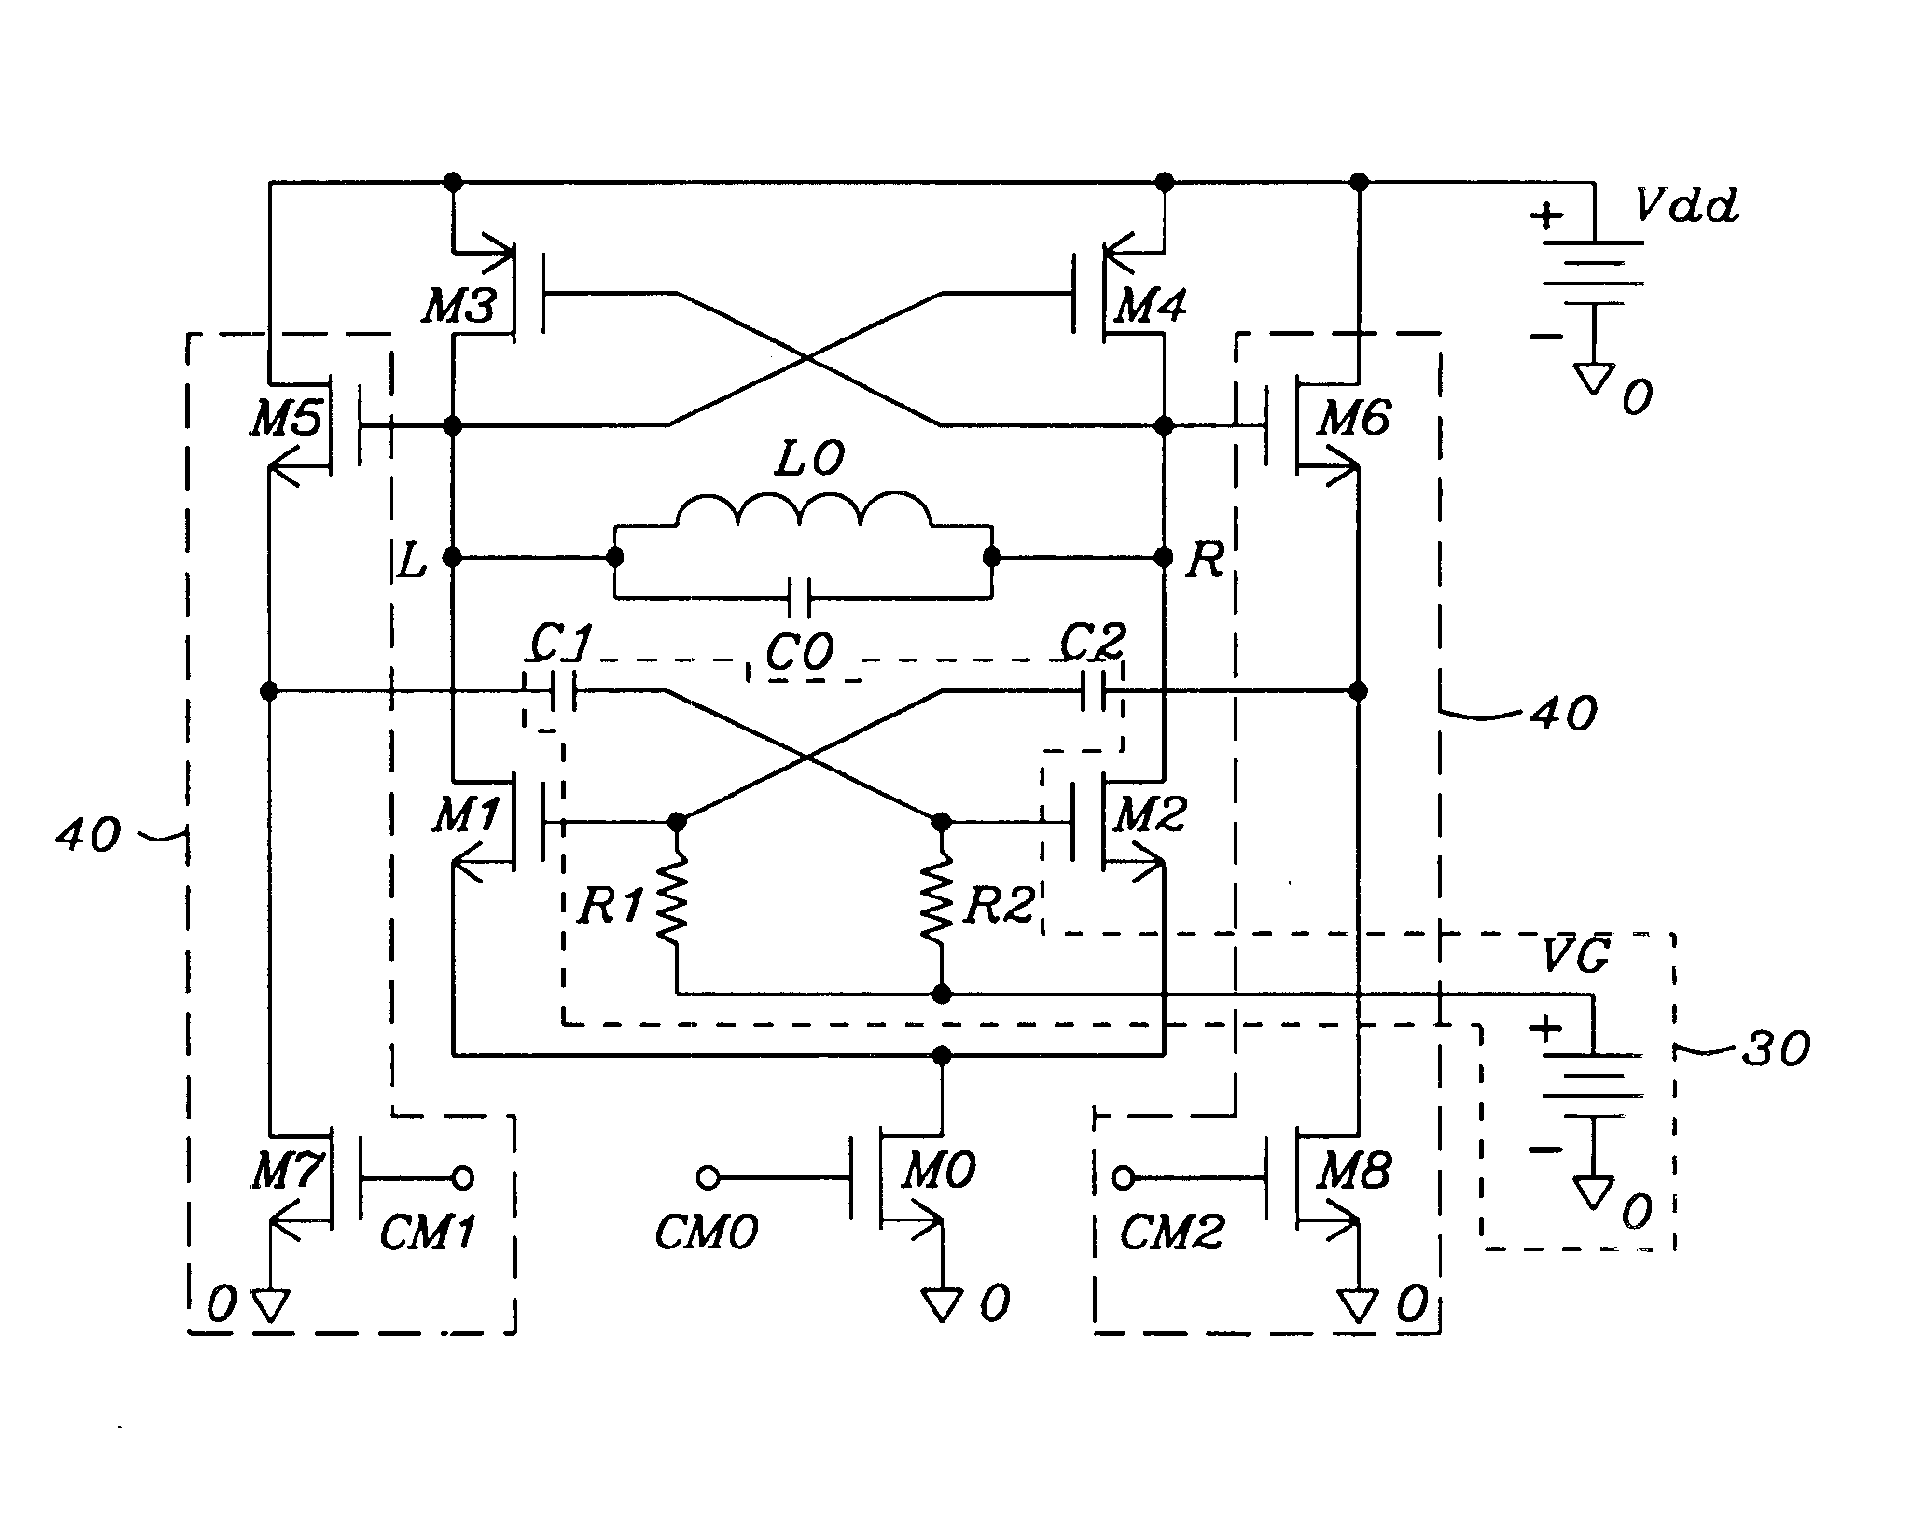 Enhanced architectures of voltage-controlled oscillators with single inductor (VCO-1L)